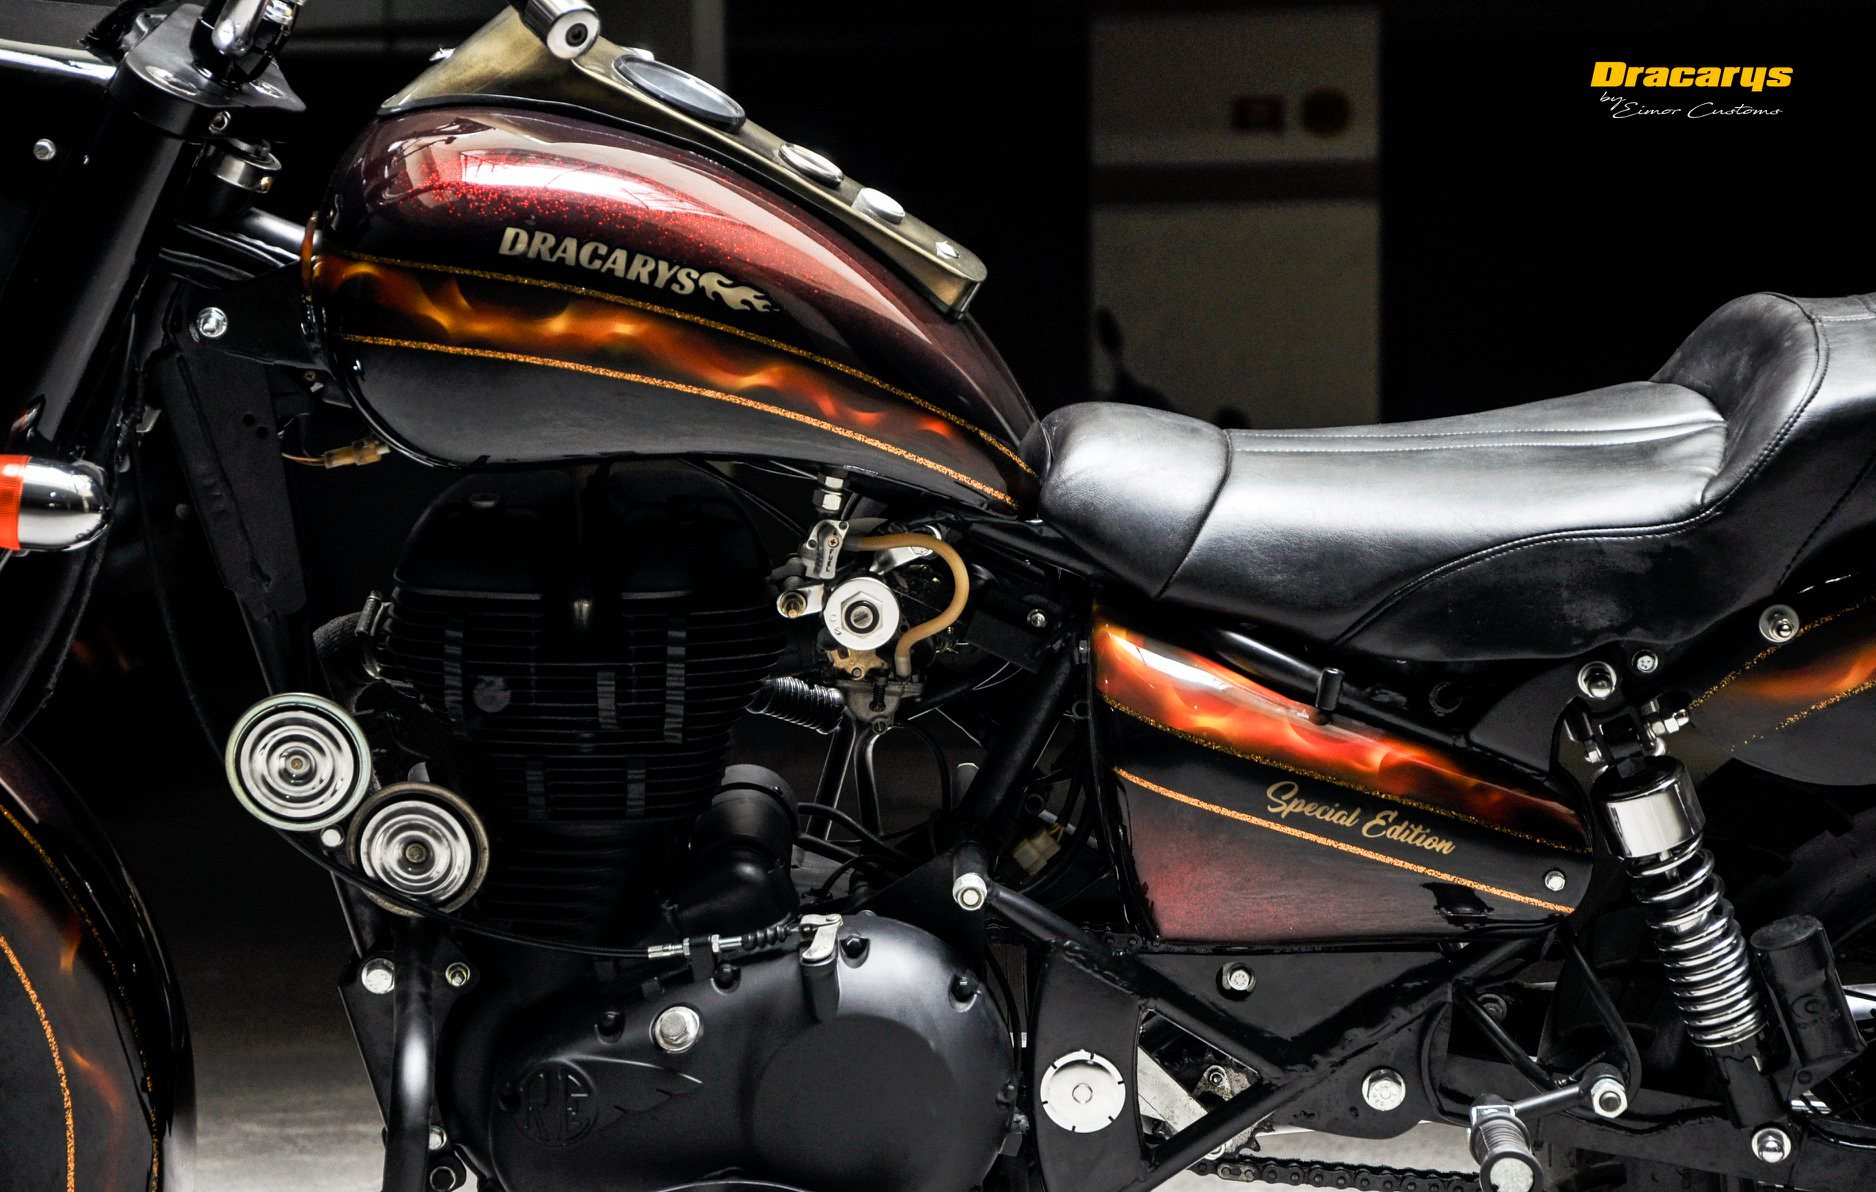 Royal Enfield Bullet 'Dracarys' Special Edition Details and Photos - side